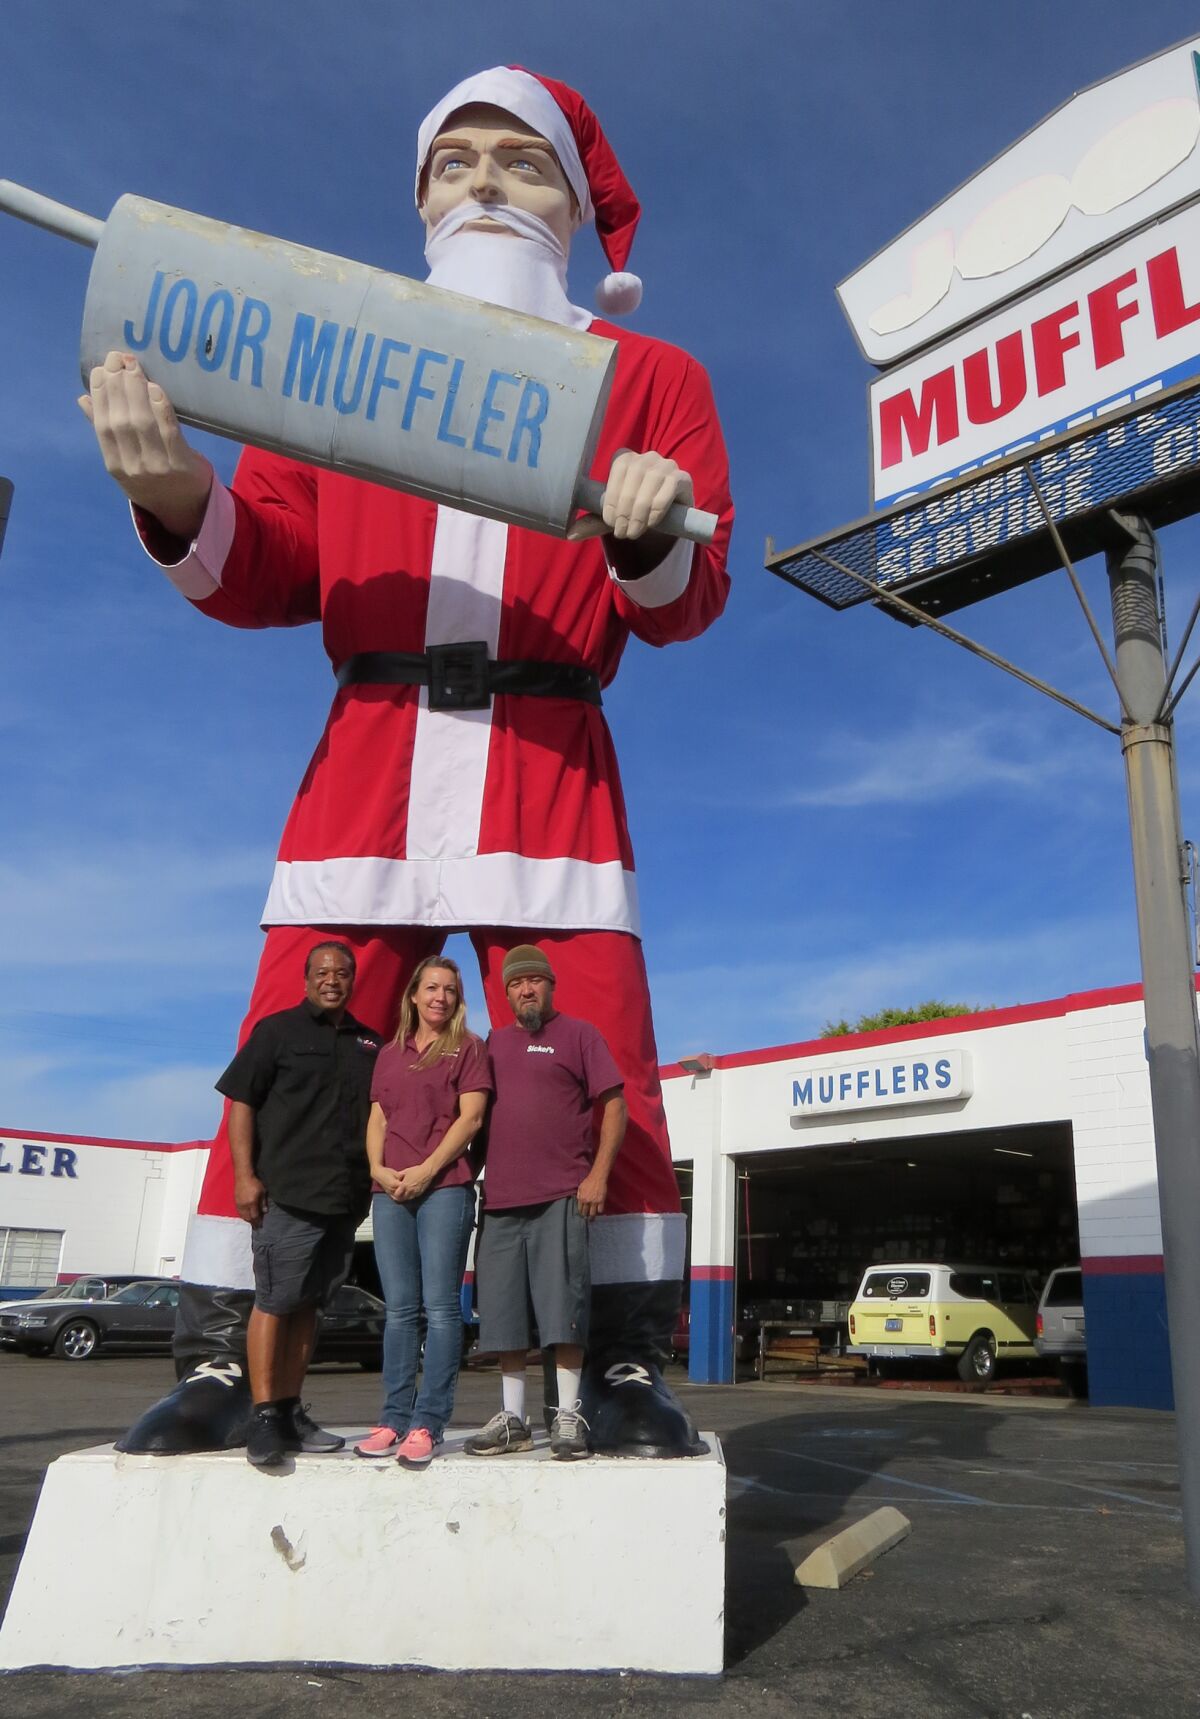 Nick Manning, owner of Joor Muffler & Auto Service, left, with Sickel's Fabrics & Upholstery store co-owners Michelle Guillen and Felix Guillen, pose with the newly costumed Joor Muffler Man in Escondido on Thursday, Dec. 5.